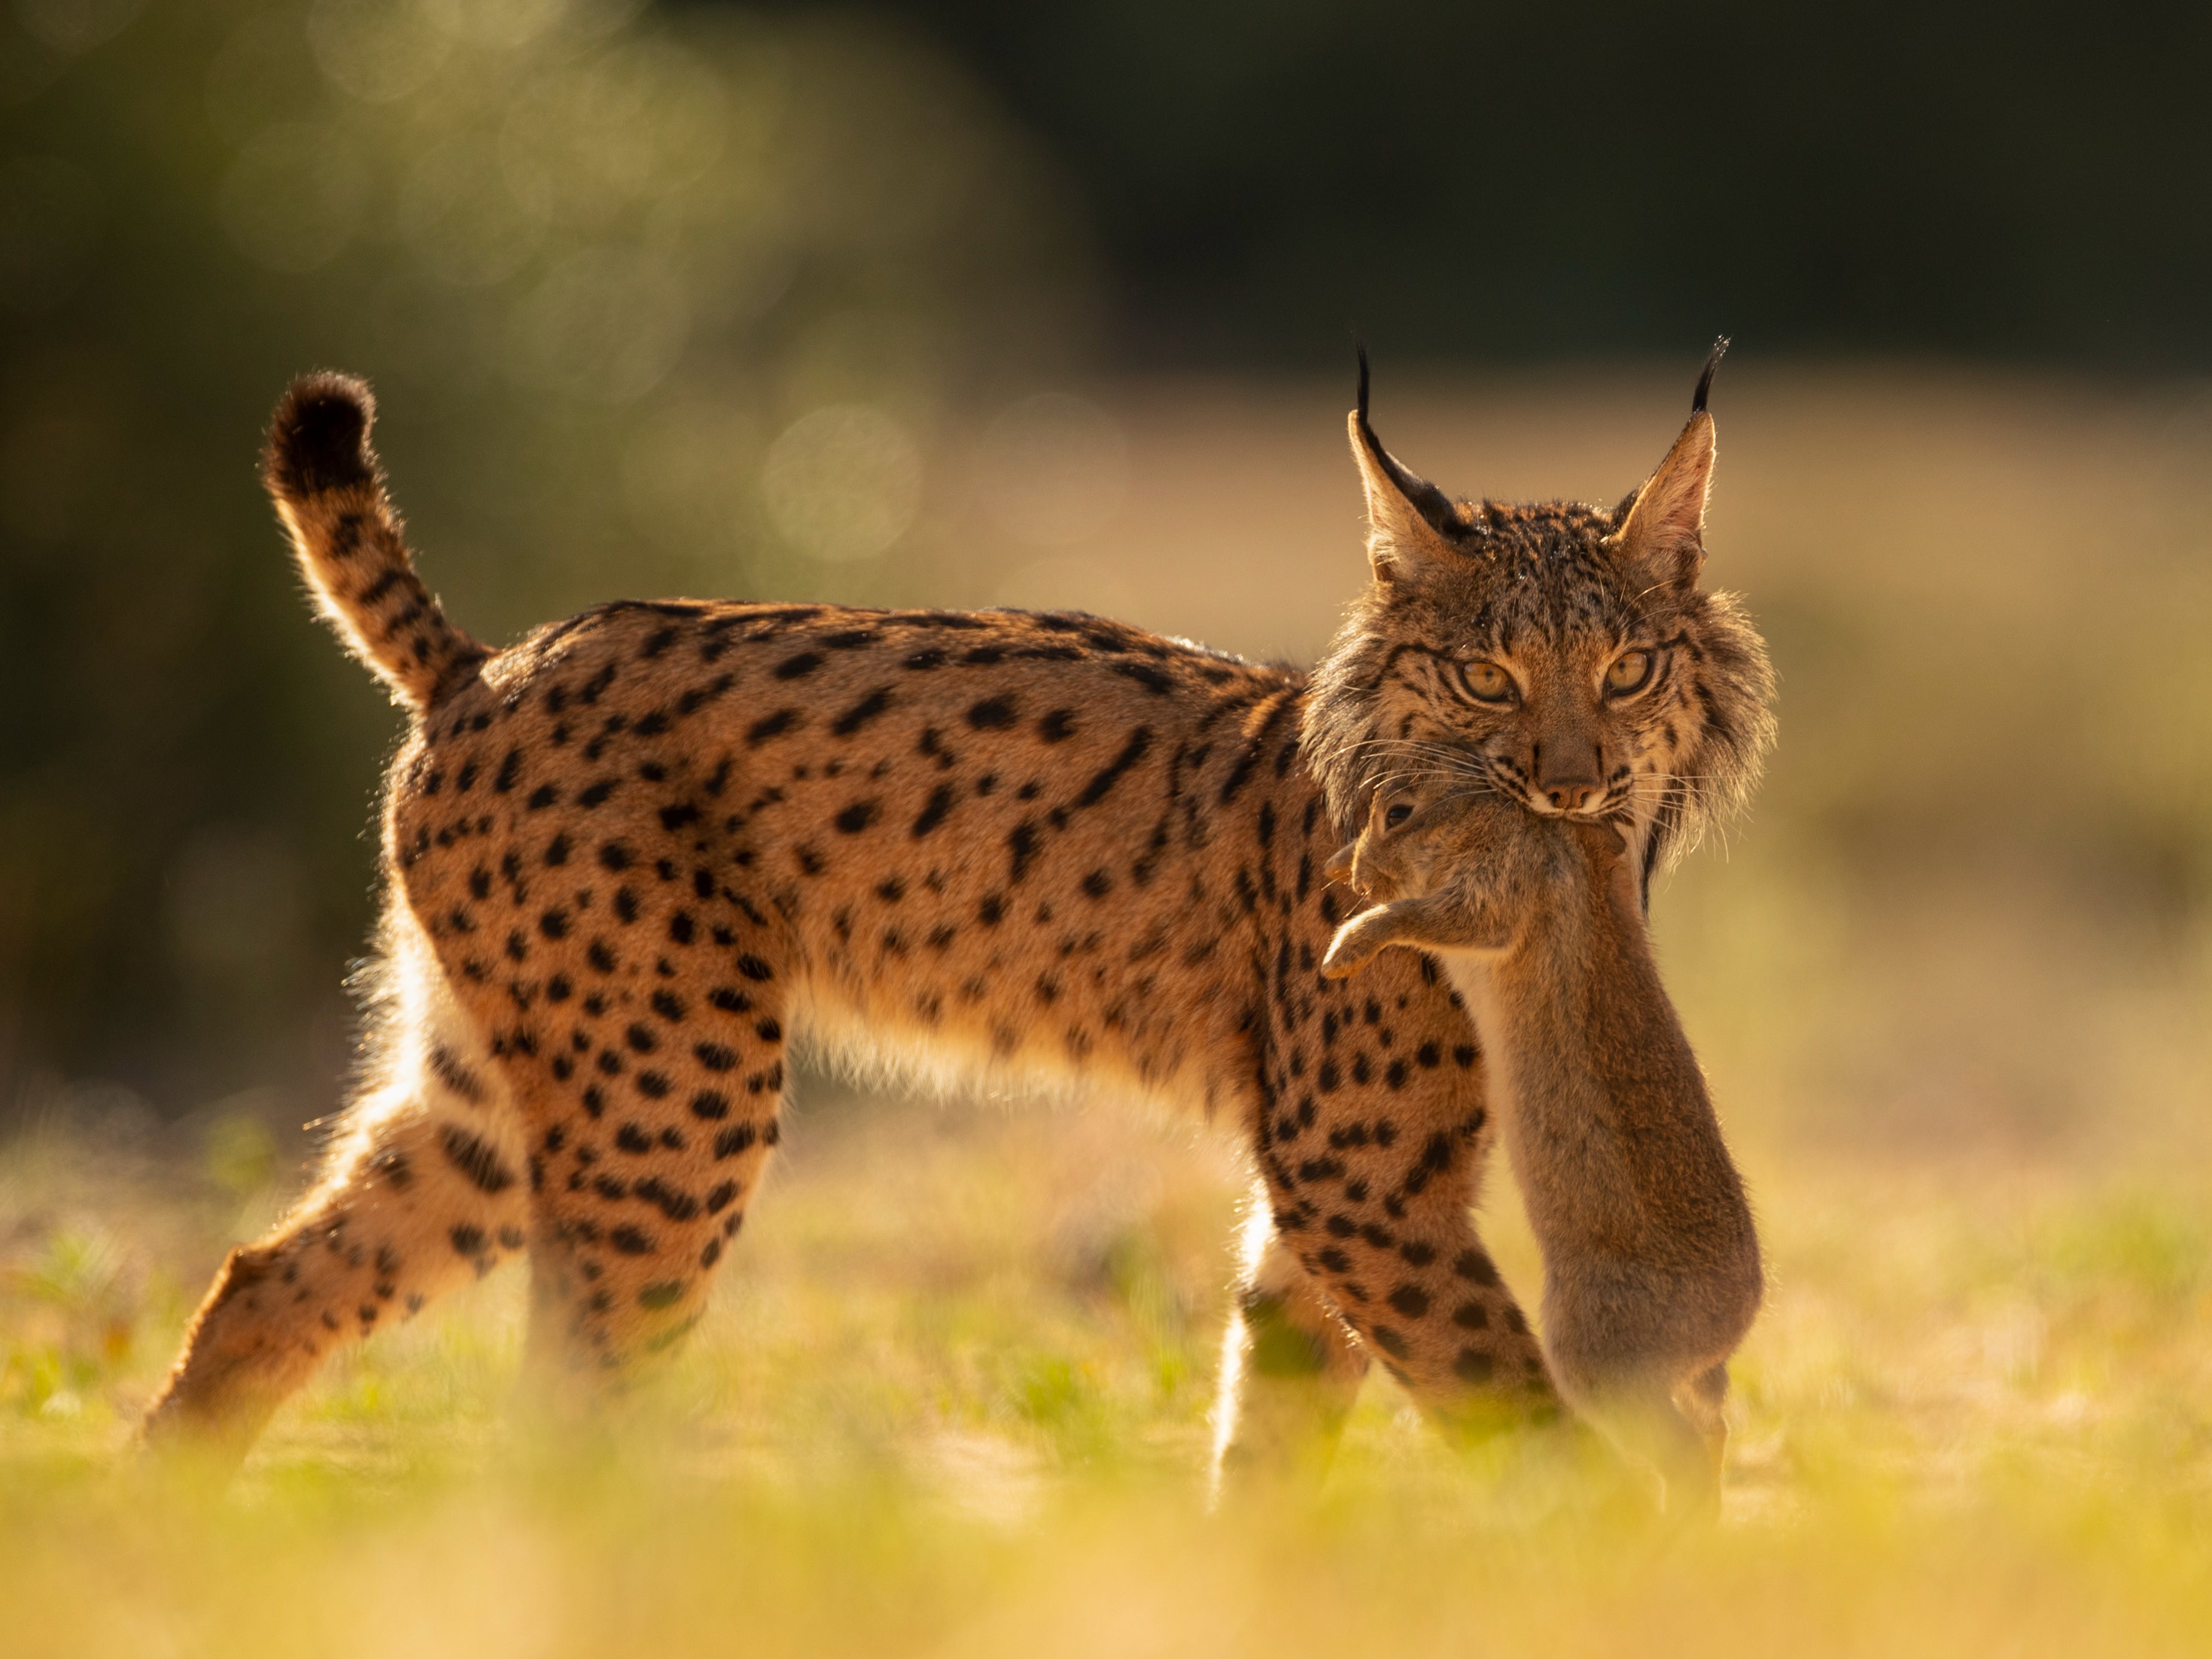 An Iberian lynx walks with a rabbit in its mouth after having captured it in the surroundings of the Doñana National Park in Aznalcazar, Spain